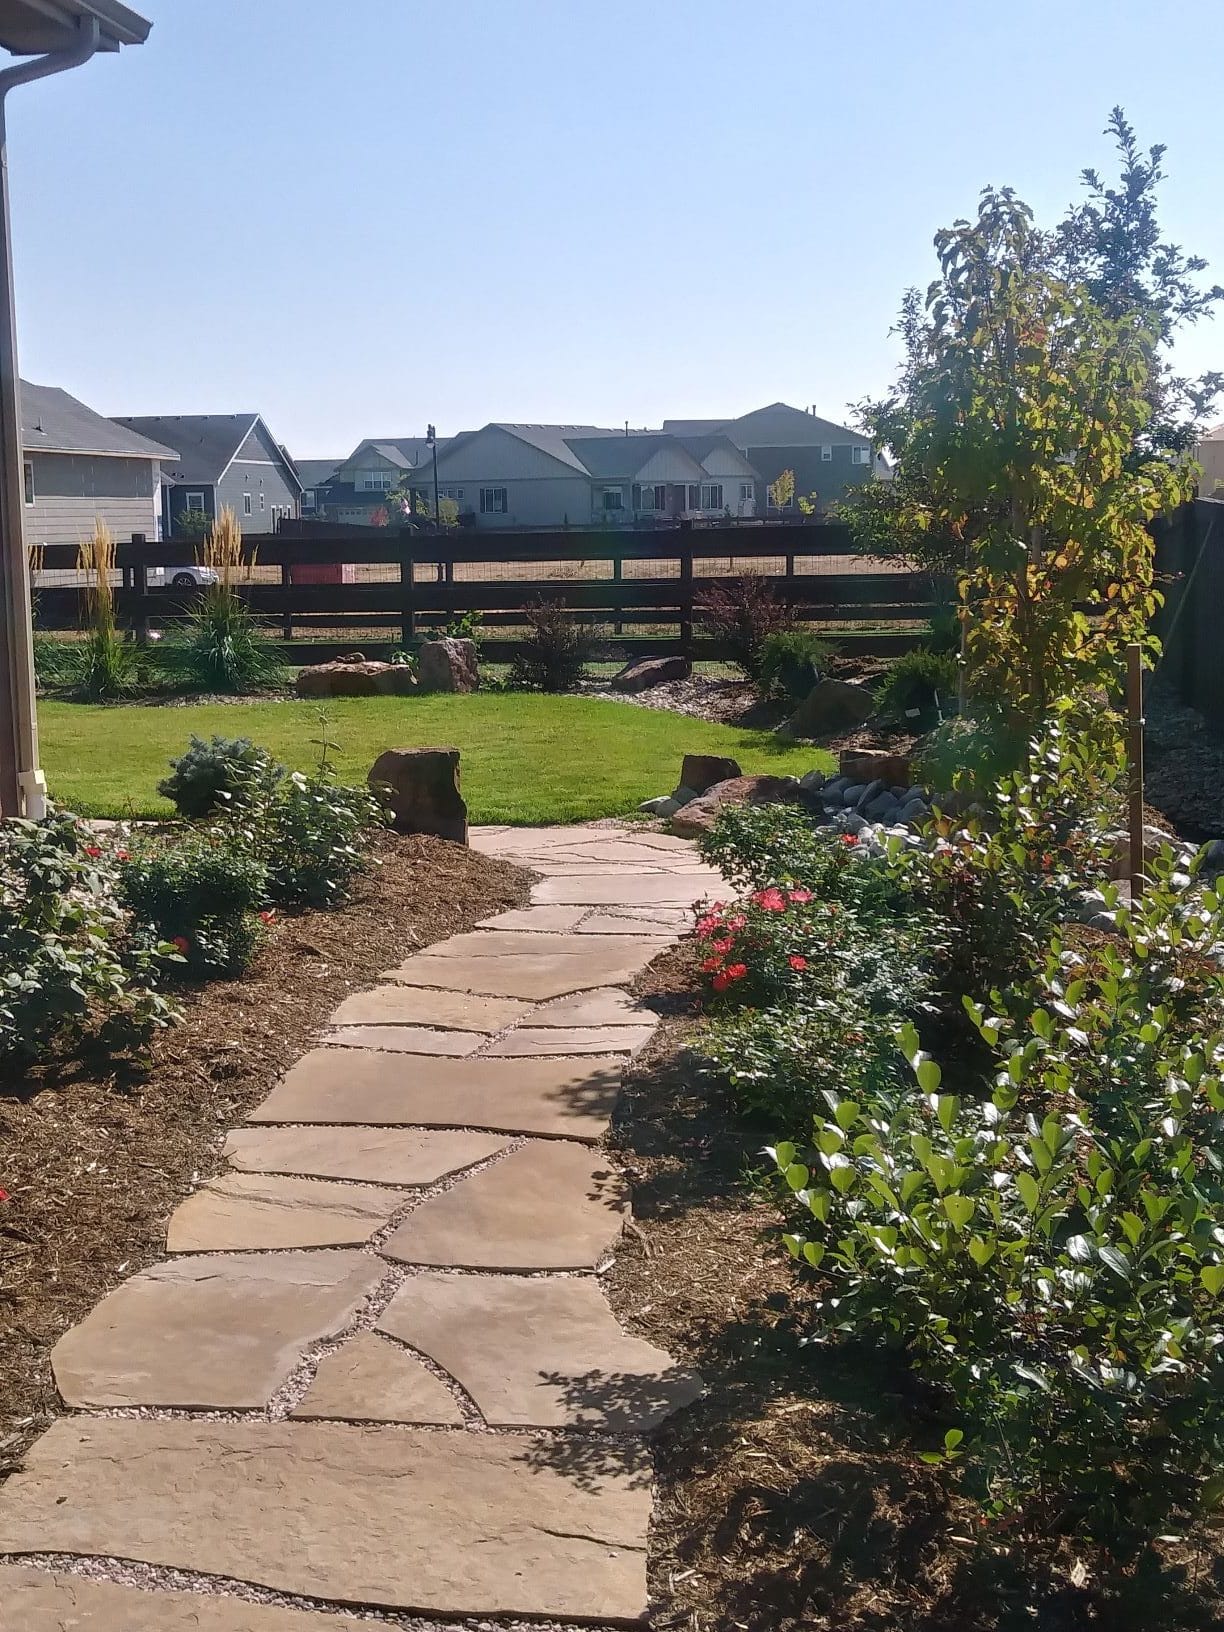 Flat stone path next to green grass with mulch and low maintenance bushes and plants.